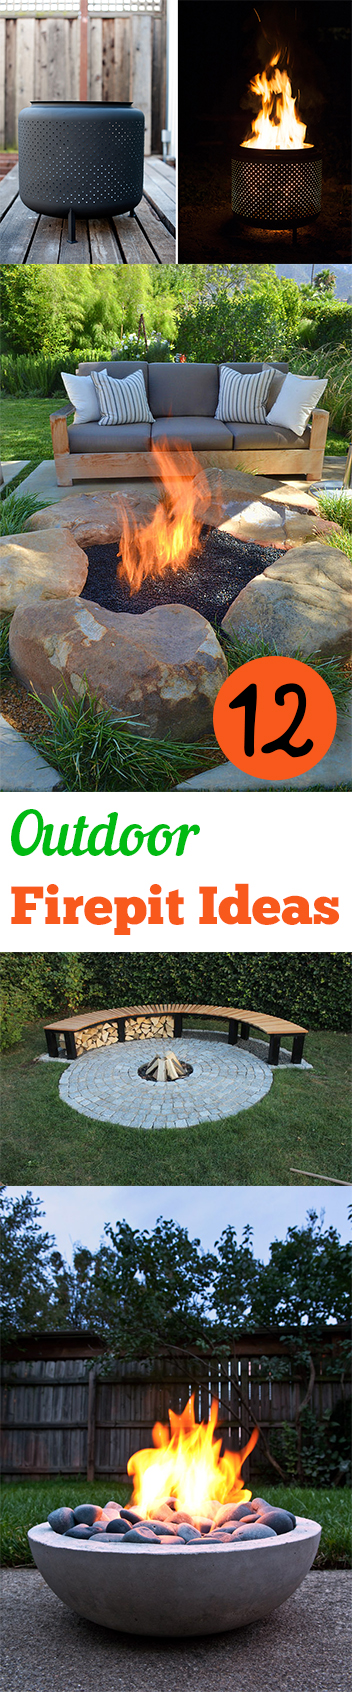 Outdoor fire pit, fire pit ideas, DIY outdoor fire pits, outdoor living, outdoor furniture, popular pin, landscaping ideas, DIY outdoor projects.